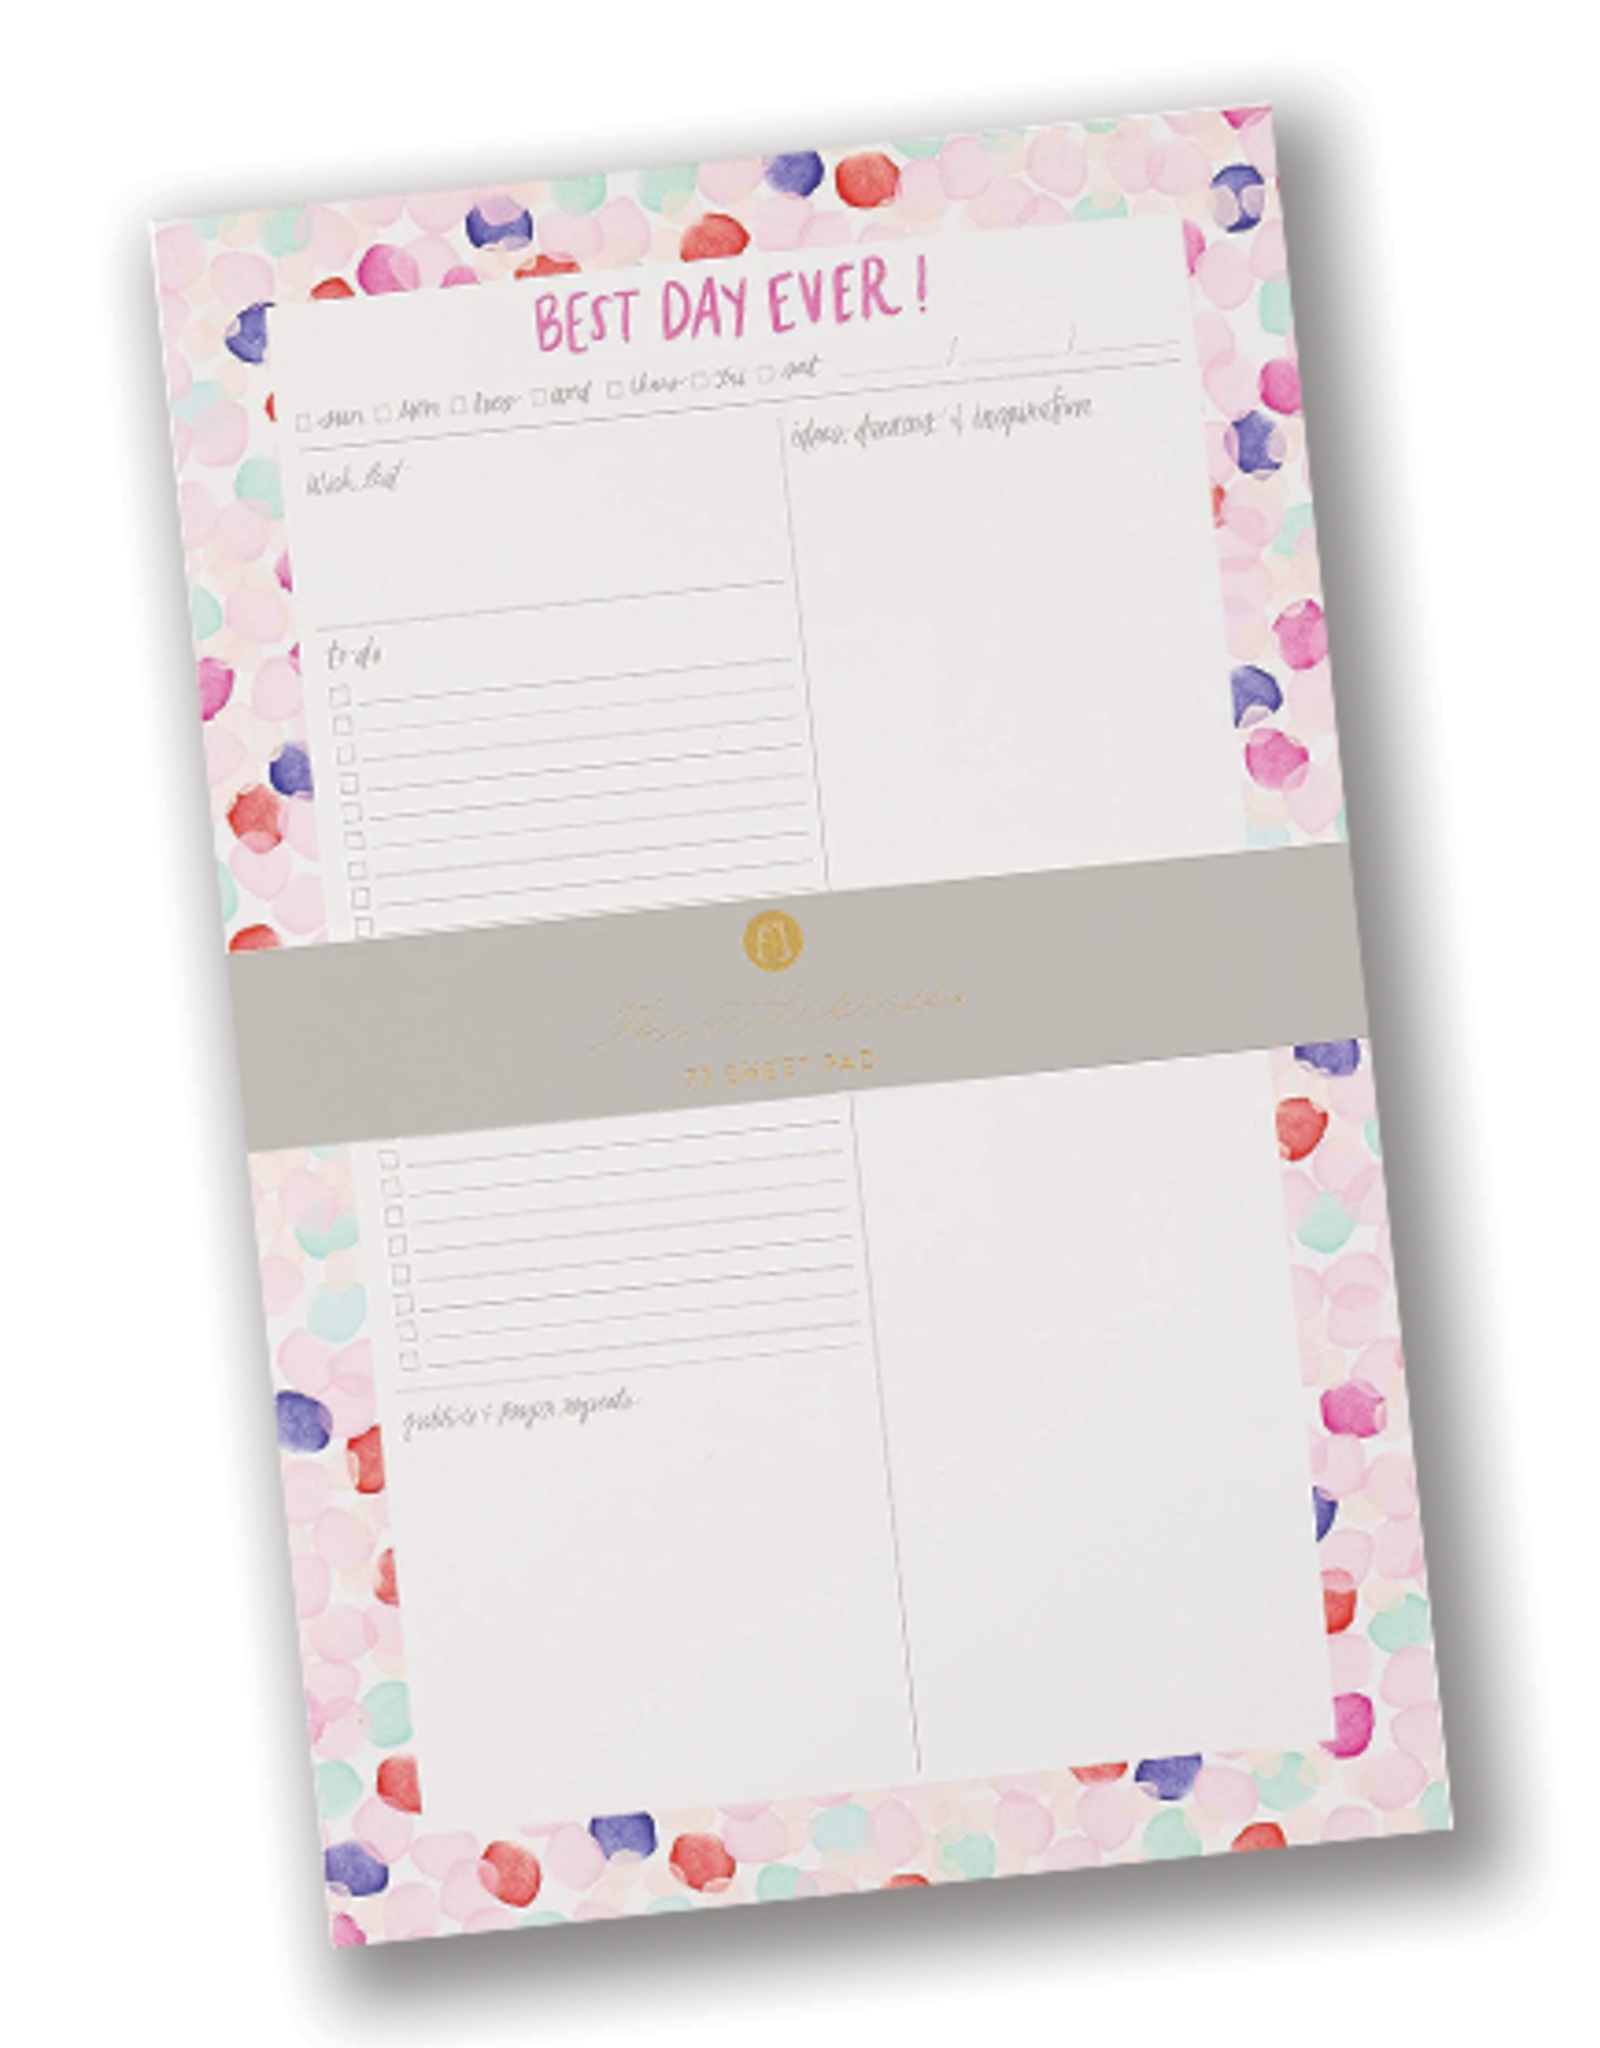 "Best Day Ever" Notepad